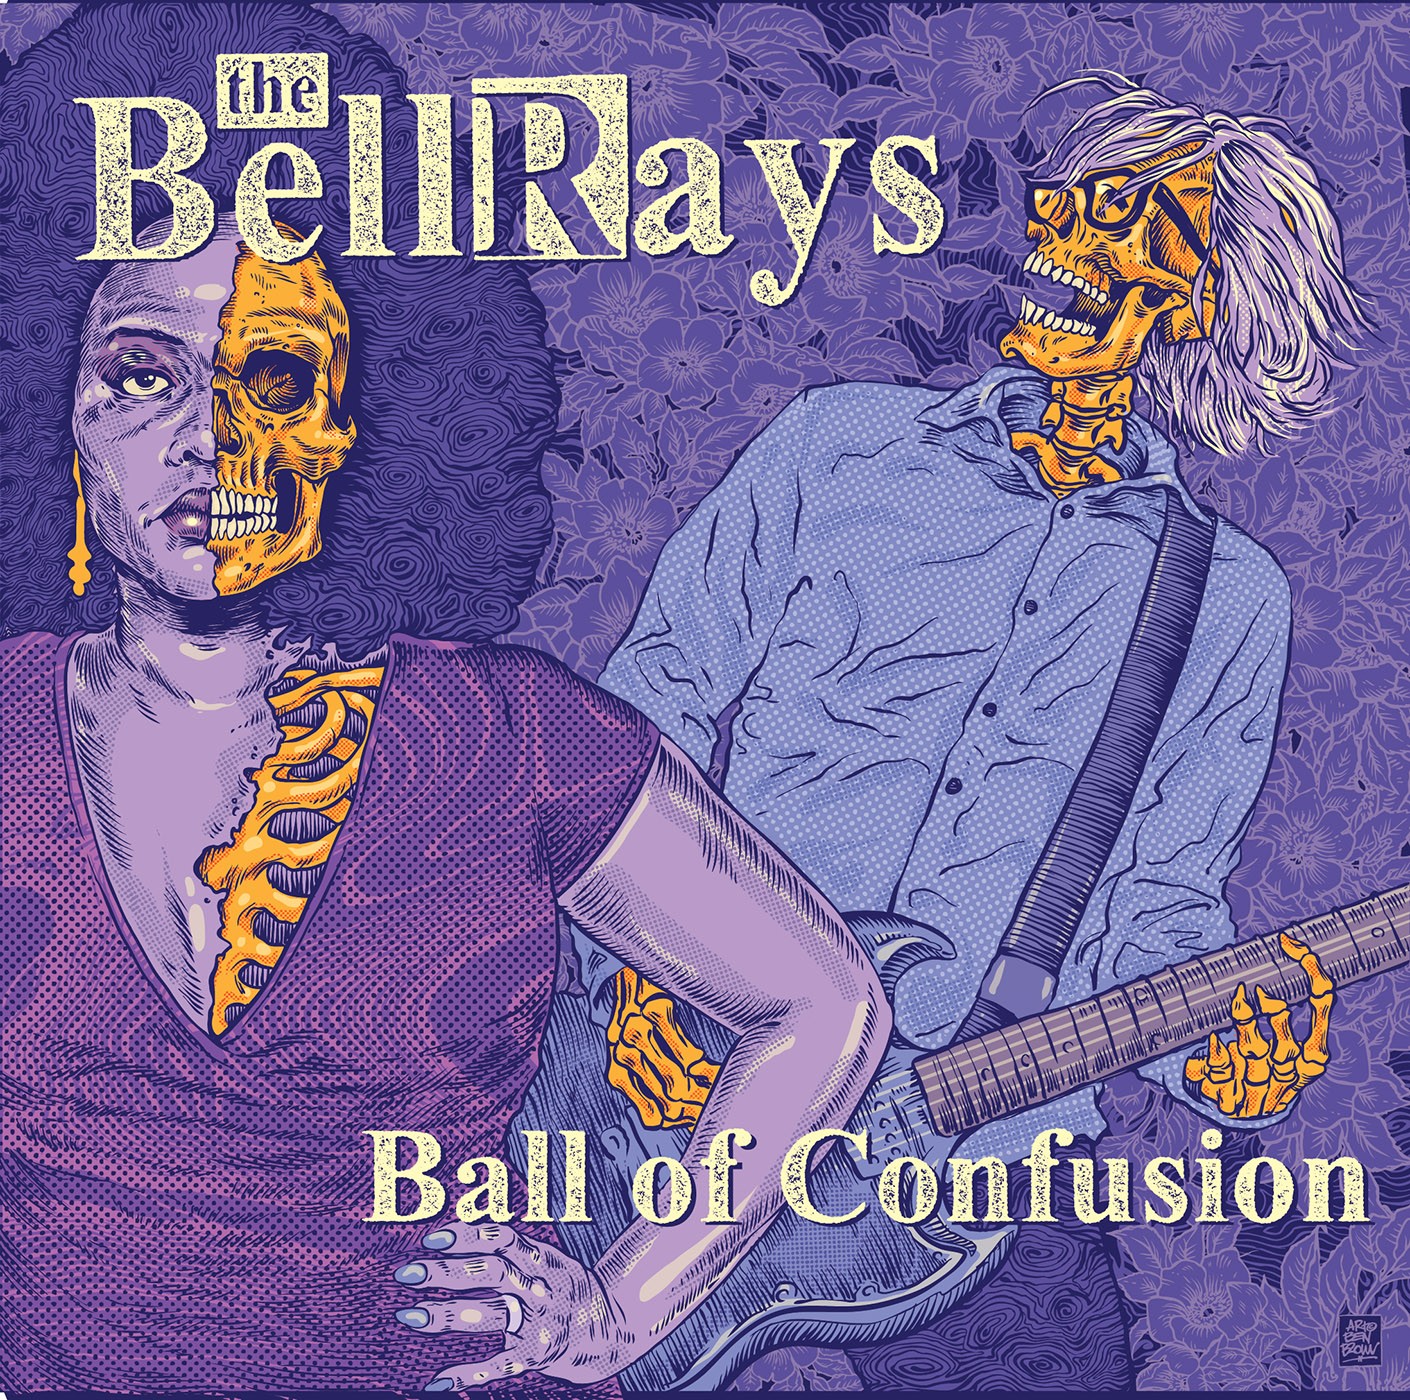 The BellRays “Ball Of Confusion” single artwork